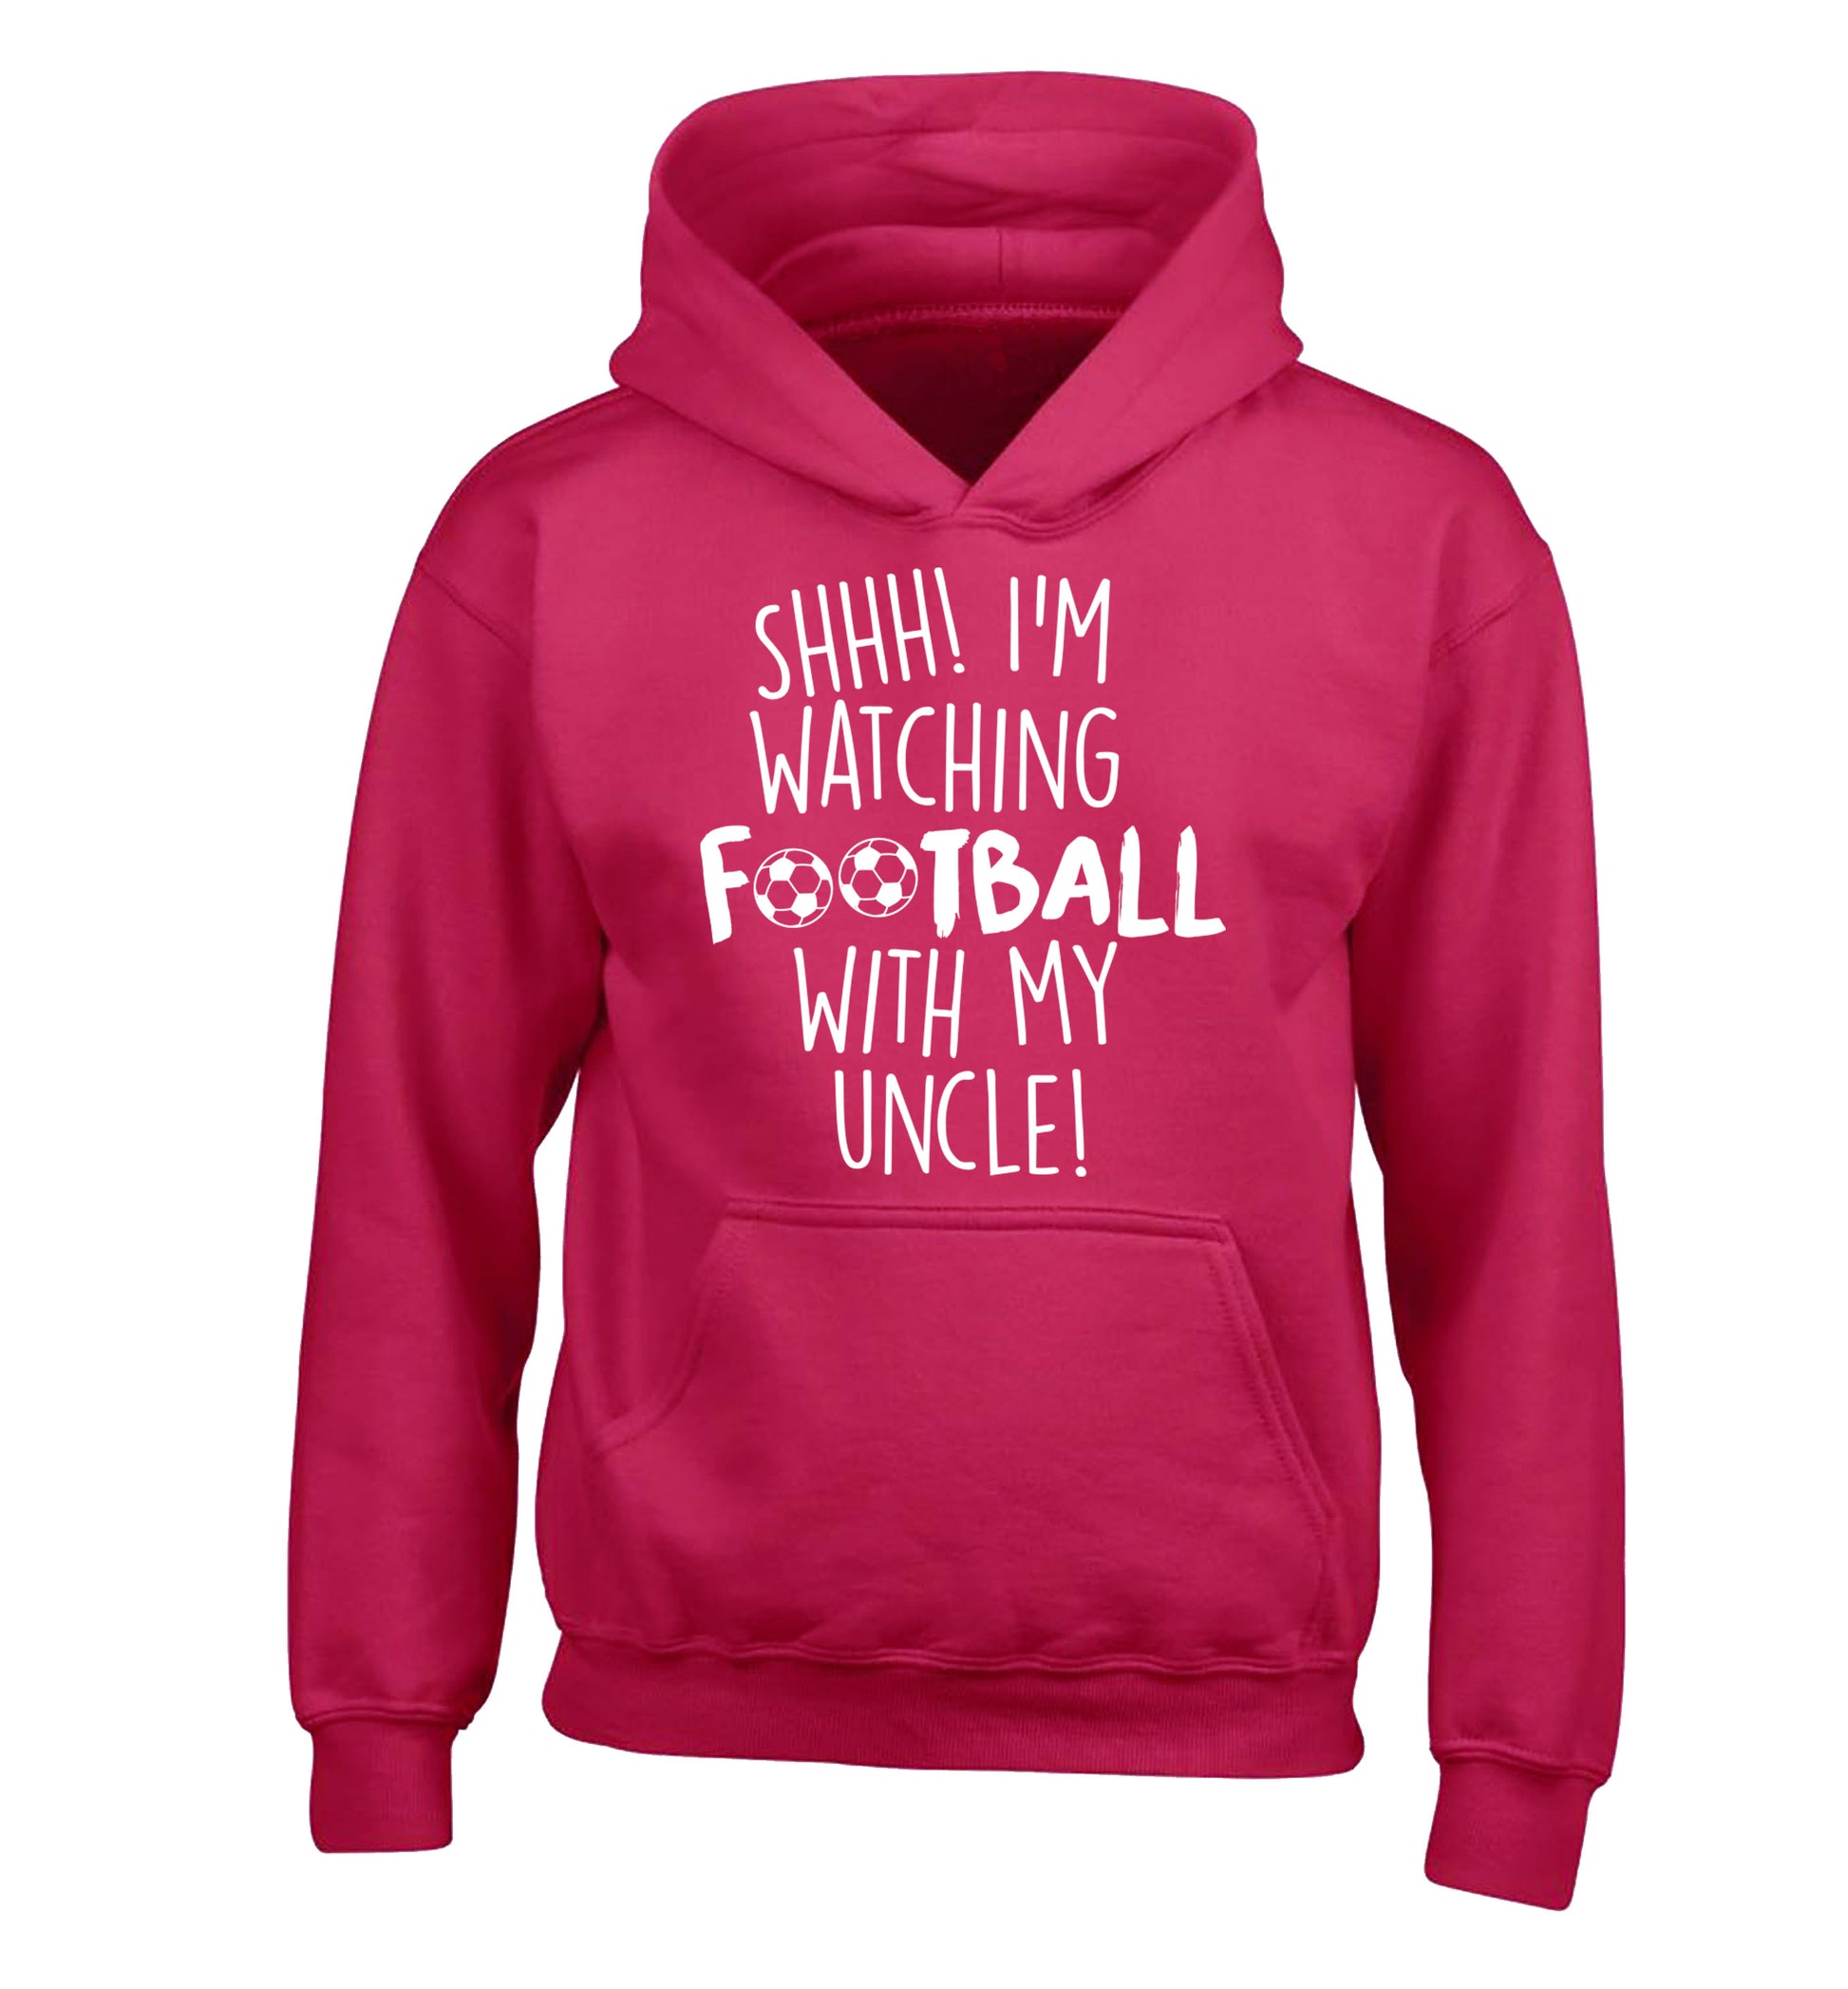 Shhh I'm watching football with my uncle children's pink hoodie 12-14 Years